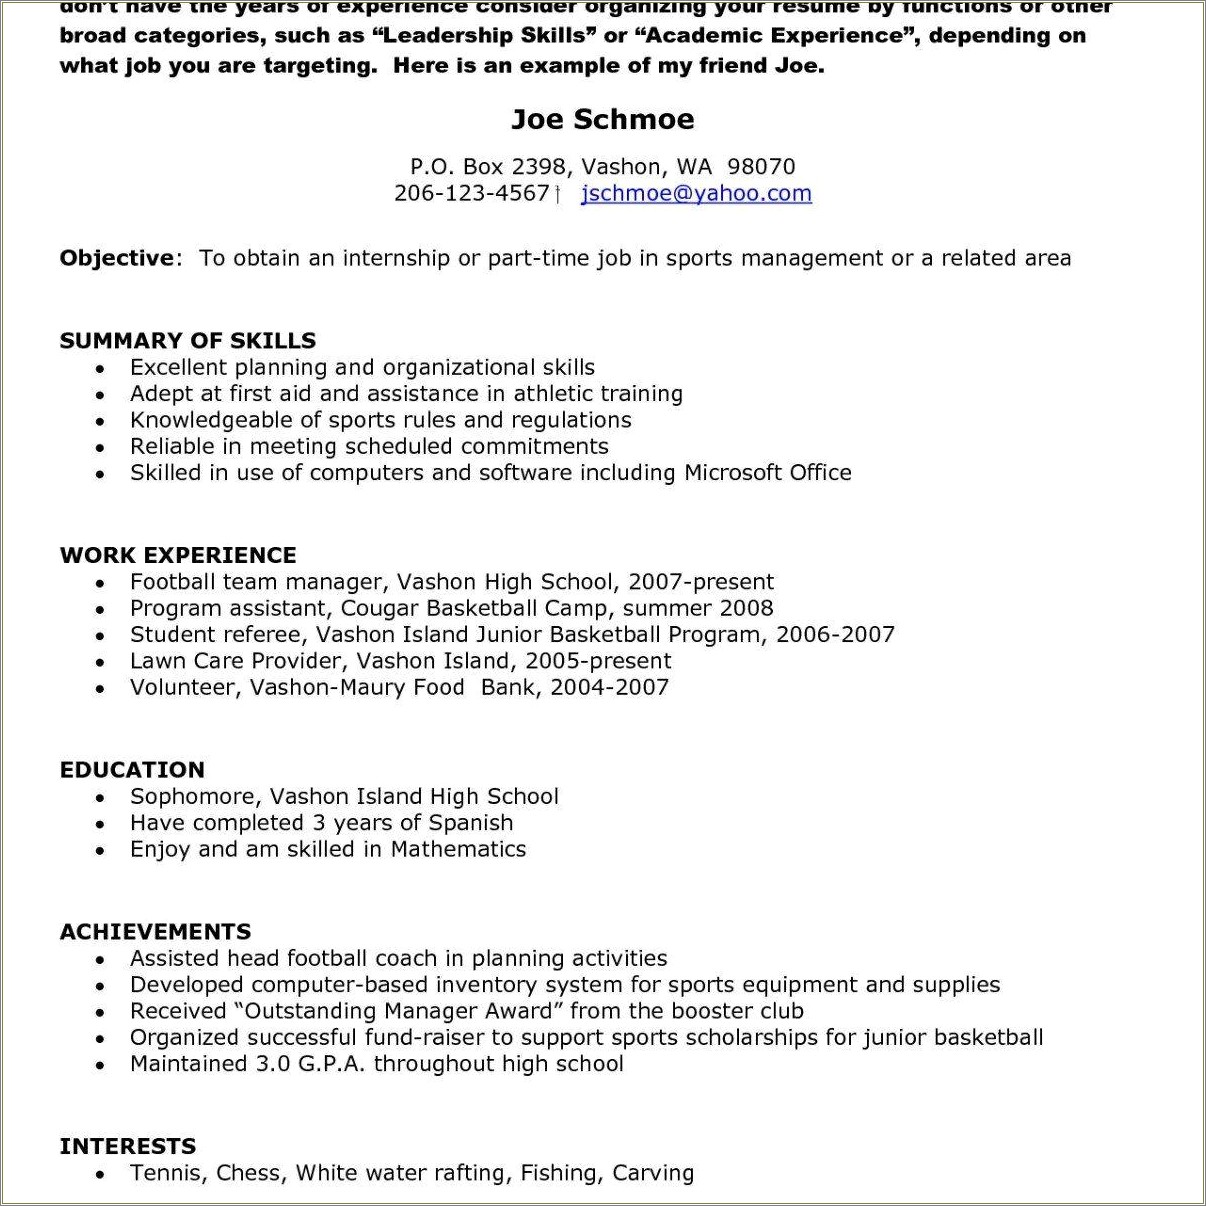 Examples Of Achievements And Awards For Resume